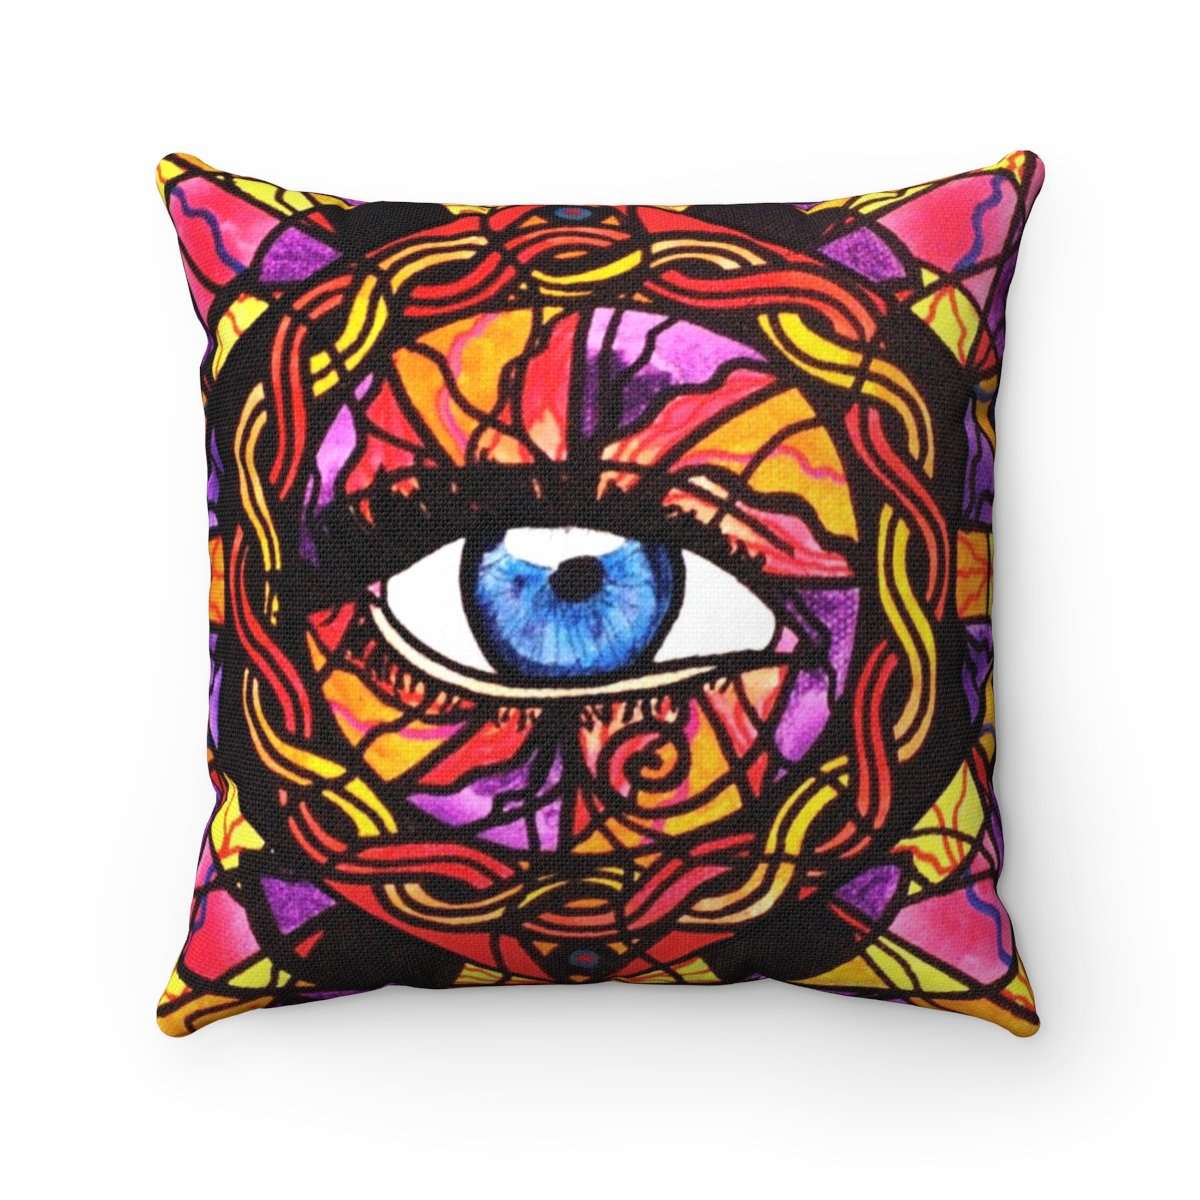 Confident Self Expression - Spun Polyester Square Pillow